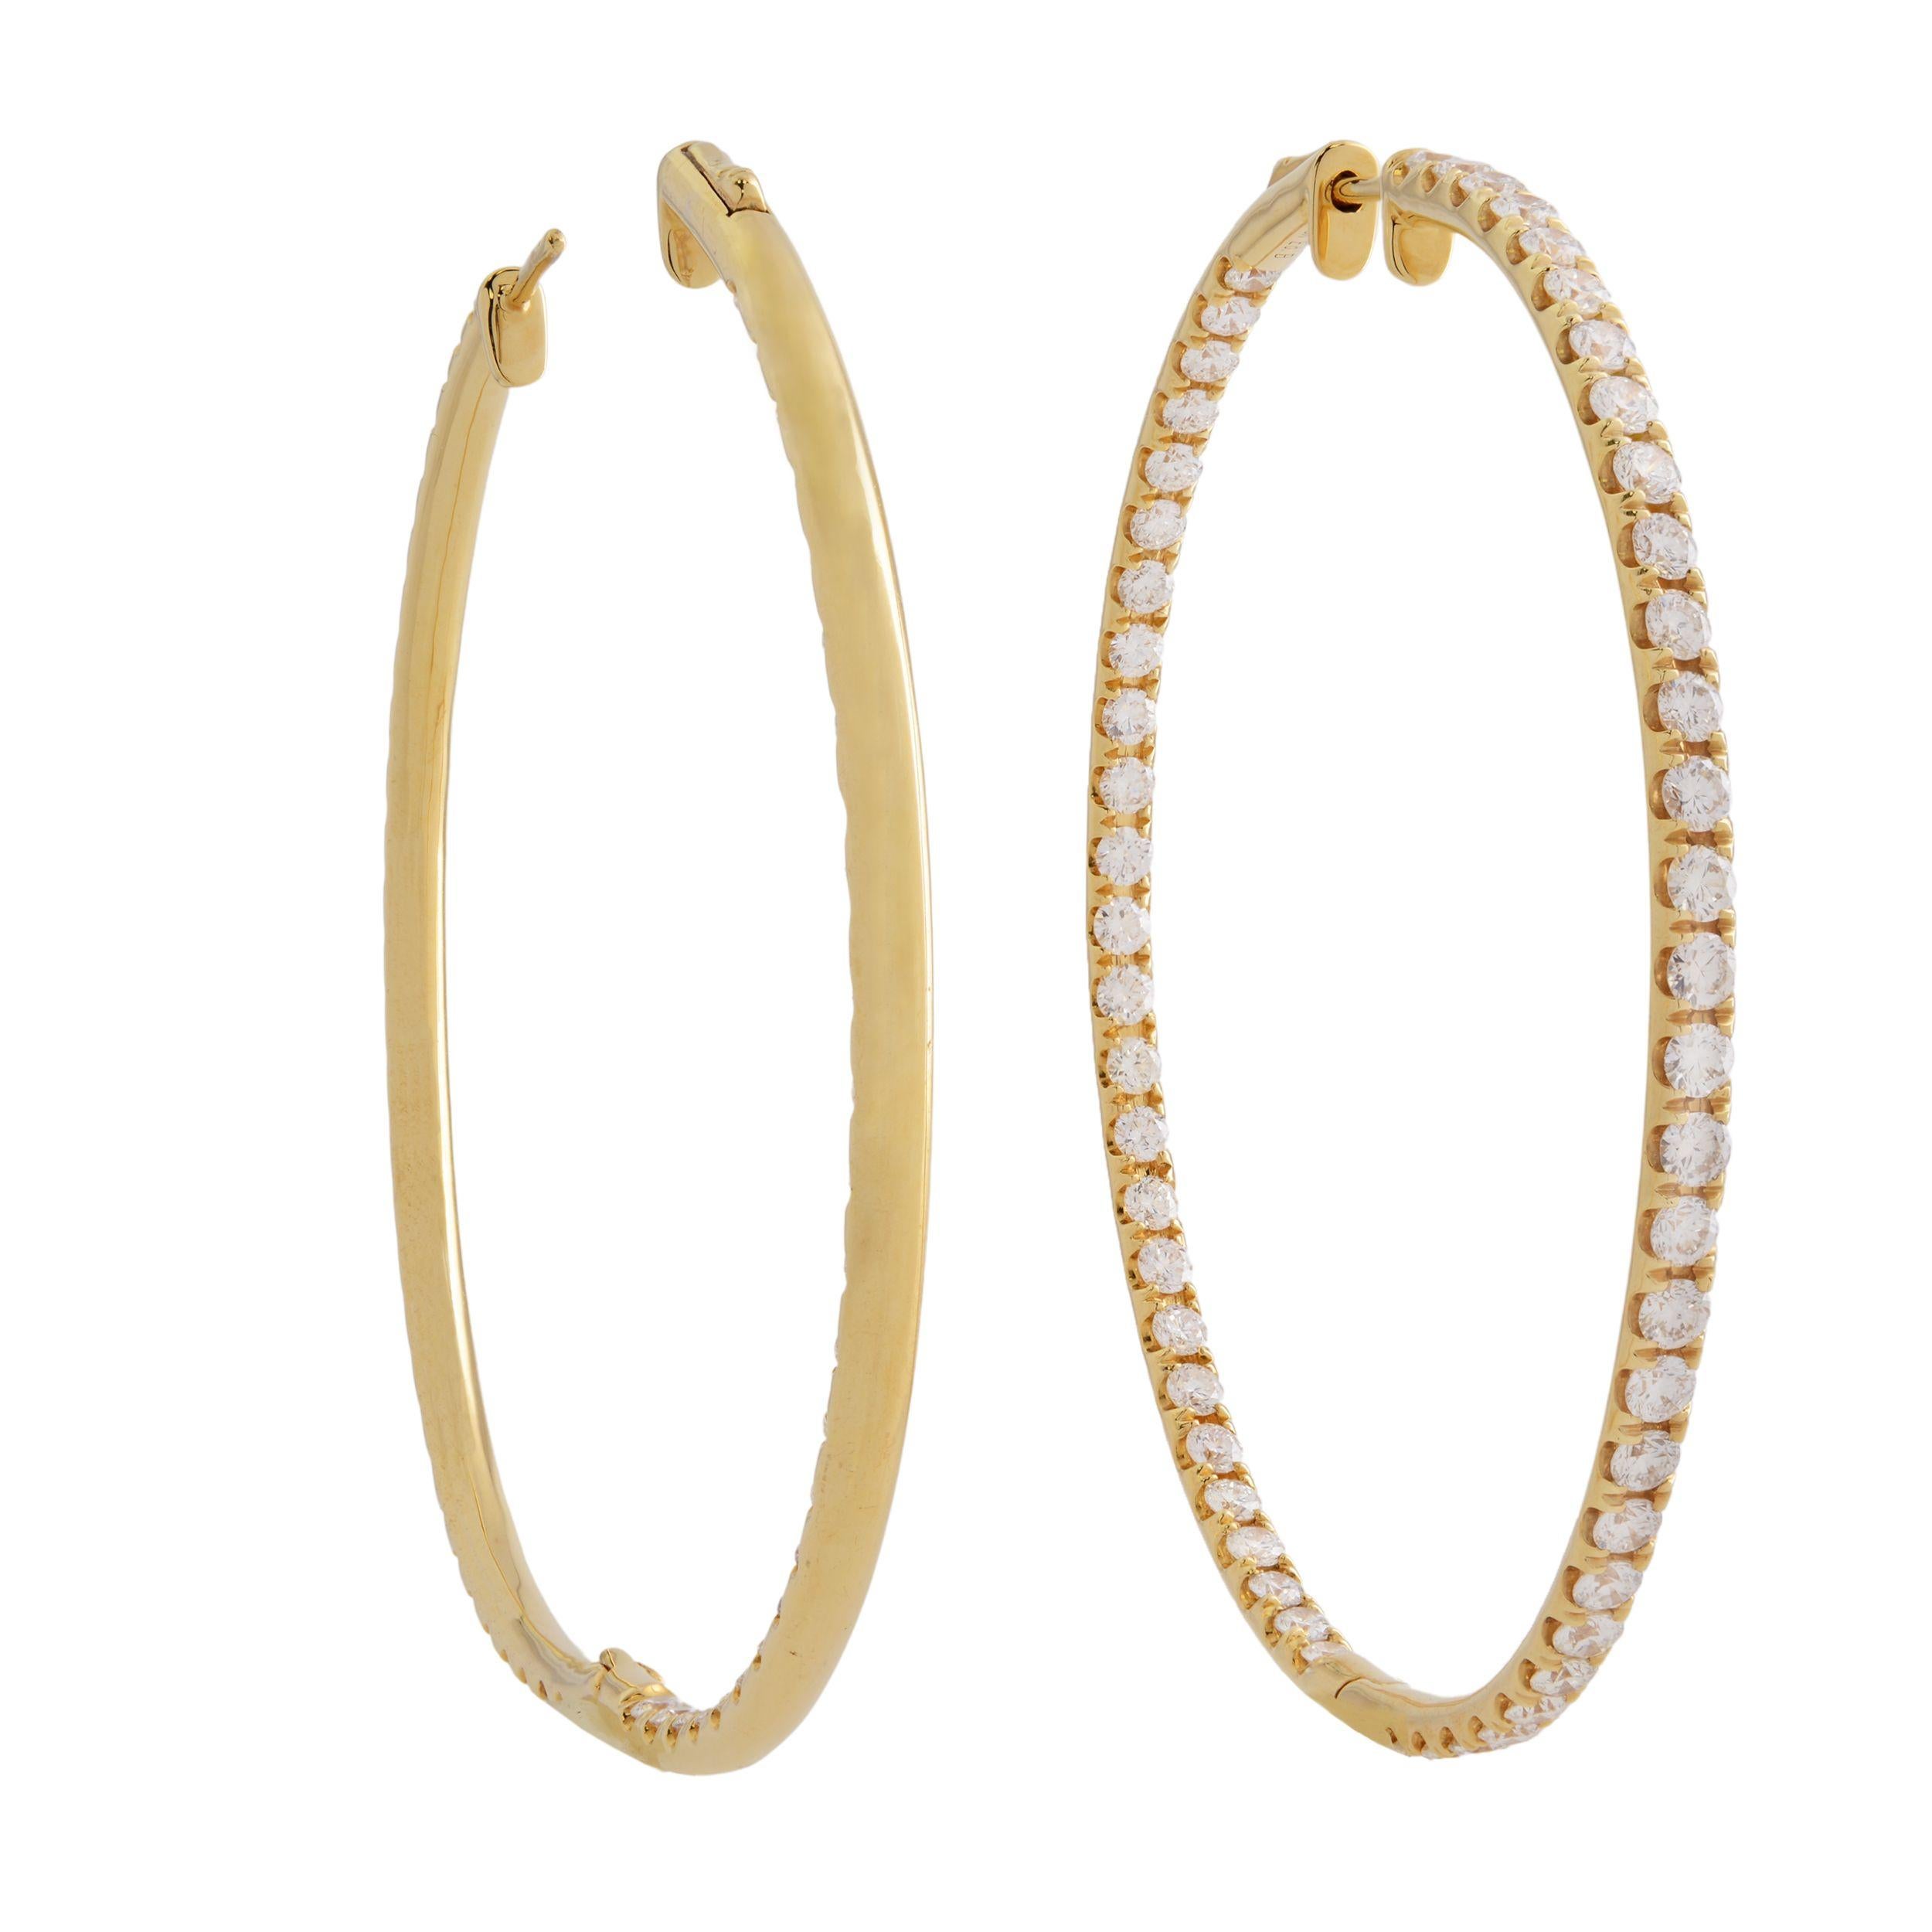 A very beautiful pair of Estate inside-out diamond hoop earrings. Each earring is crafted in 18K yellow gold which are lined with sparkling round cut pave set diamonds. The stones line only half of the outer hoop and half of the inner hoop. Total